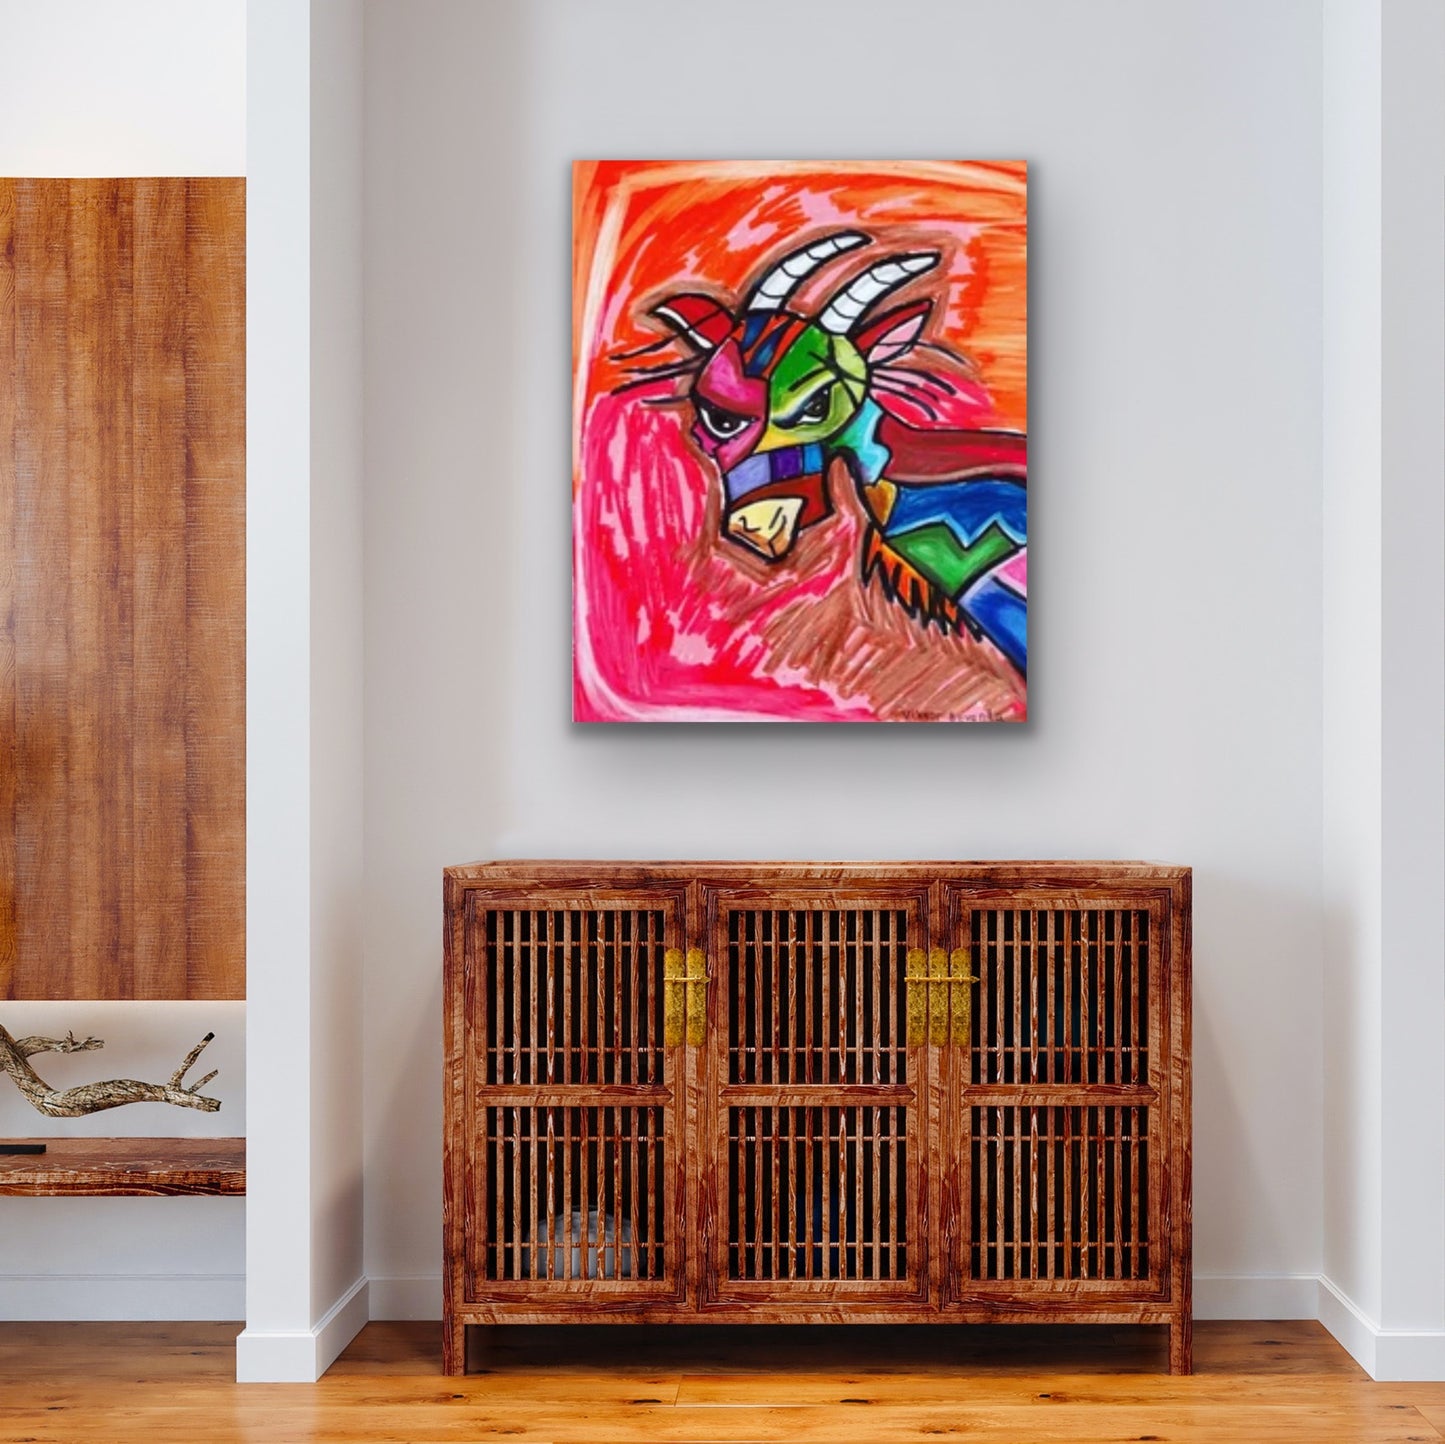 Crazy GOAT - Stretched Canvas Print in more sizes